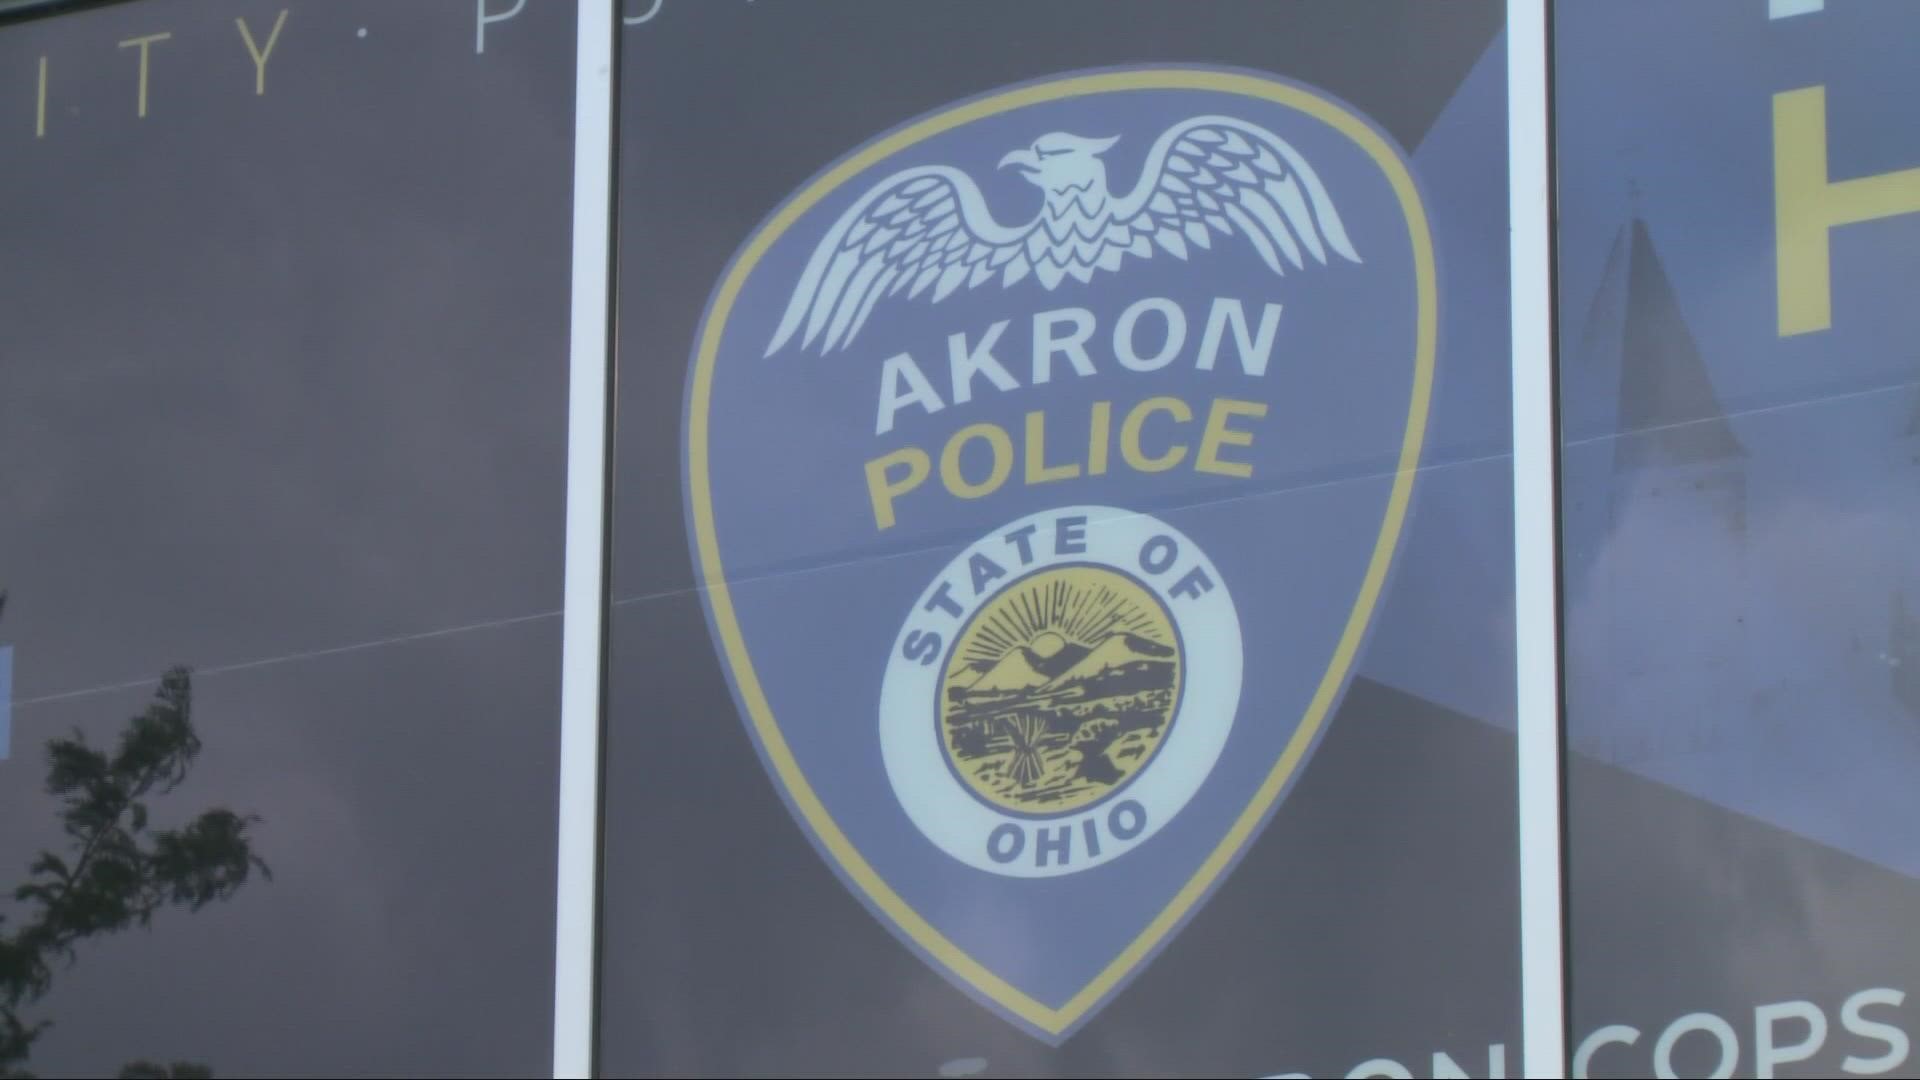 More than 29,000 residents voted in favor of Akron Issue 10, which establishes a police oversight board.